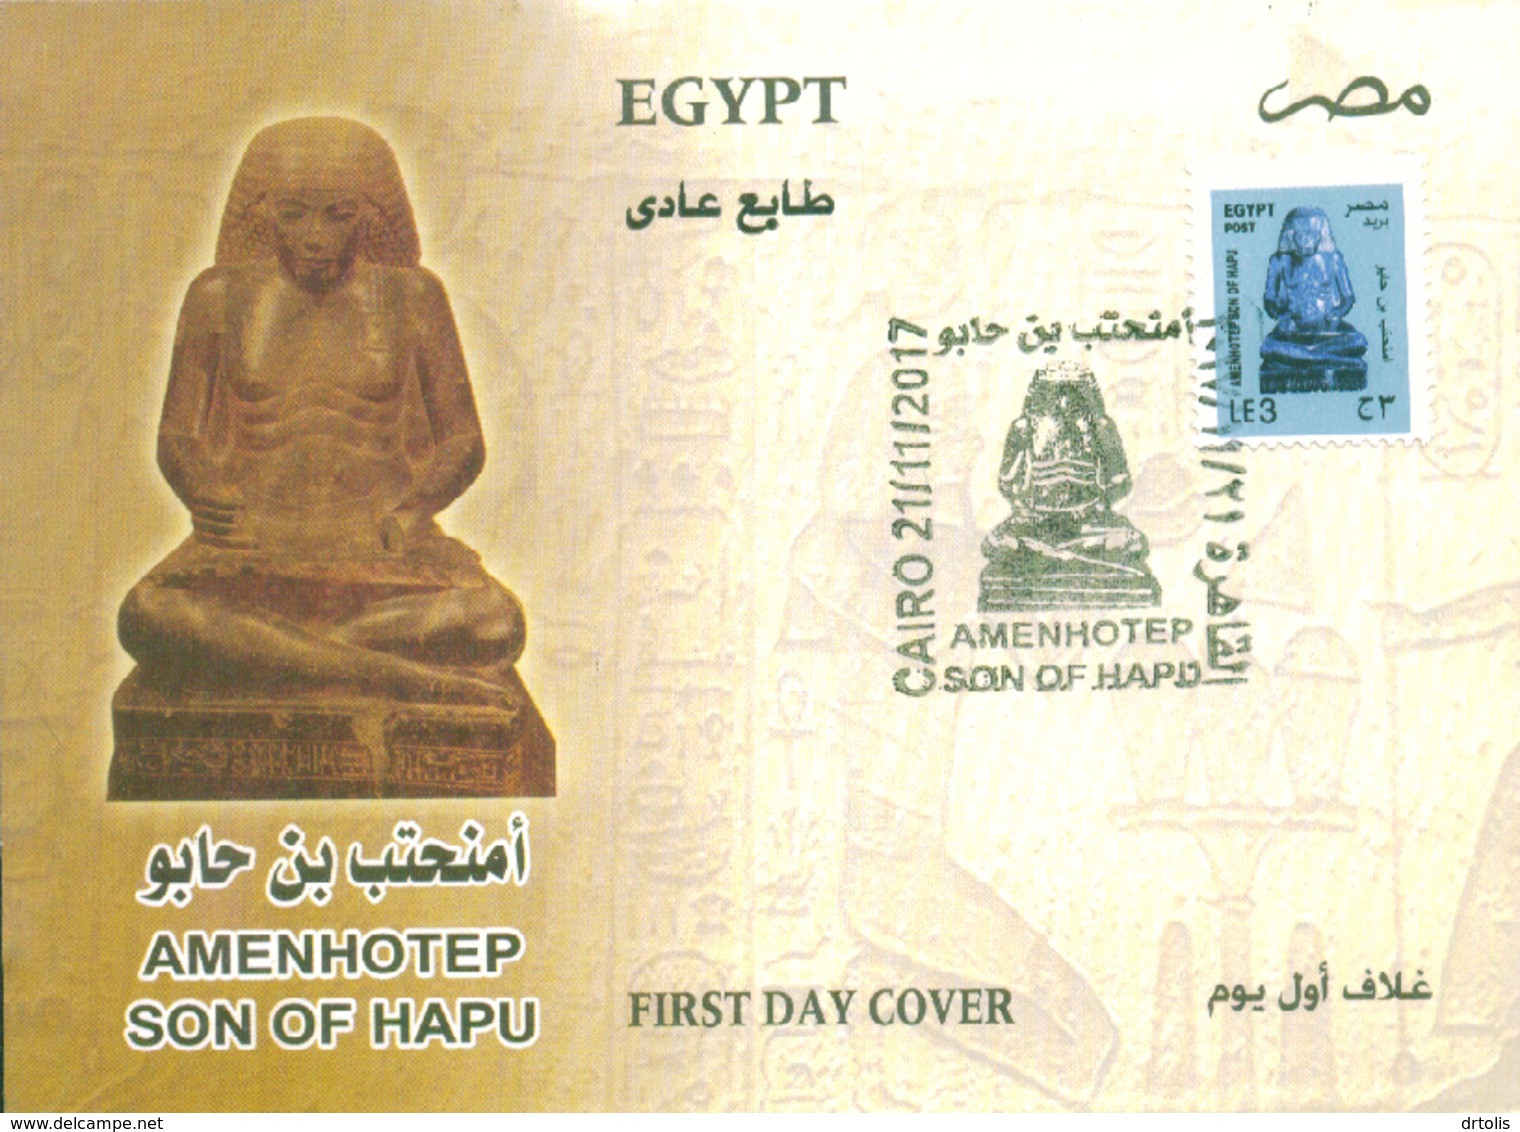 EGYPT / 2015 - 2017 / THUTMOSE III / AMENHOTEP ; SON OF HAPU / 2 FDCS WITH DIFFERENT DATES OF ISSUE ???? - Cartas & Documentos